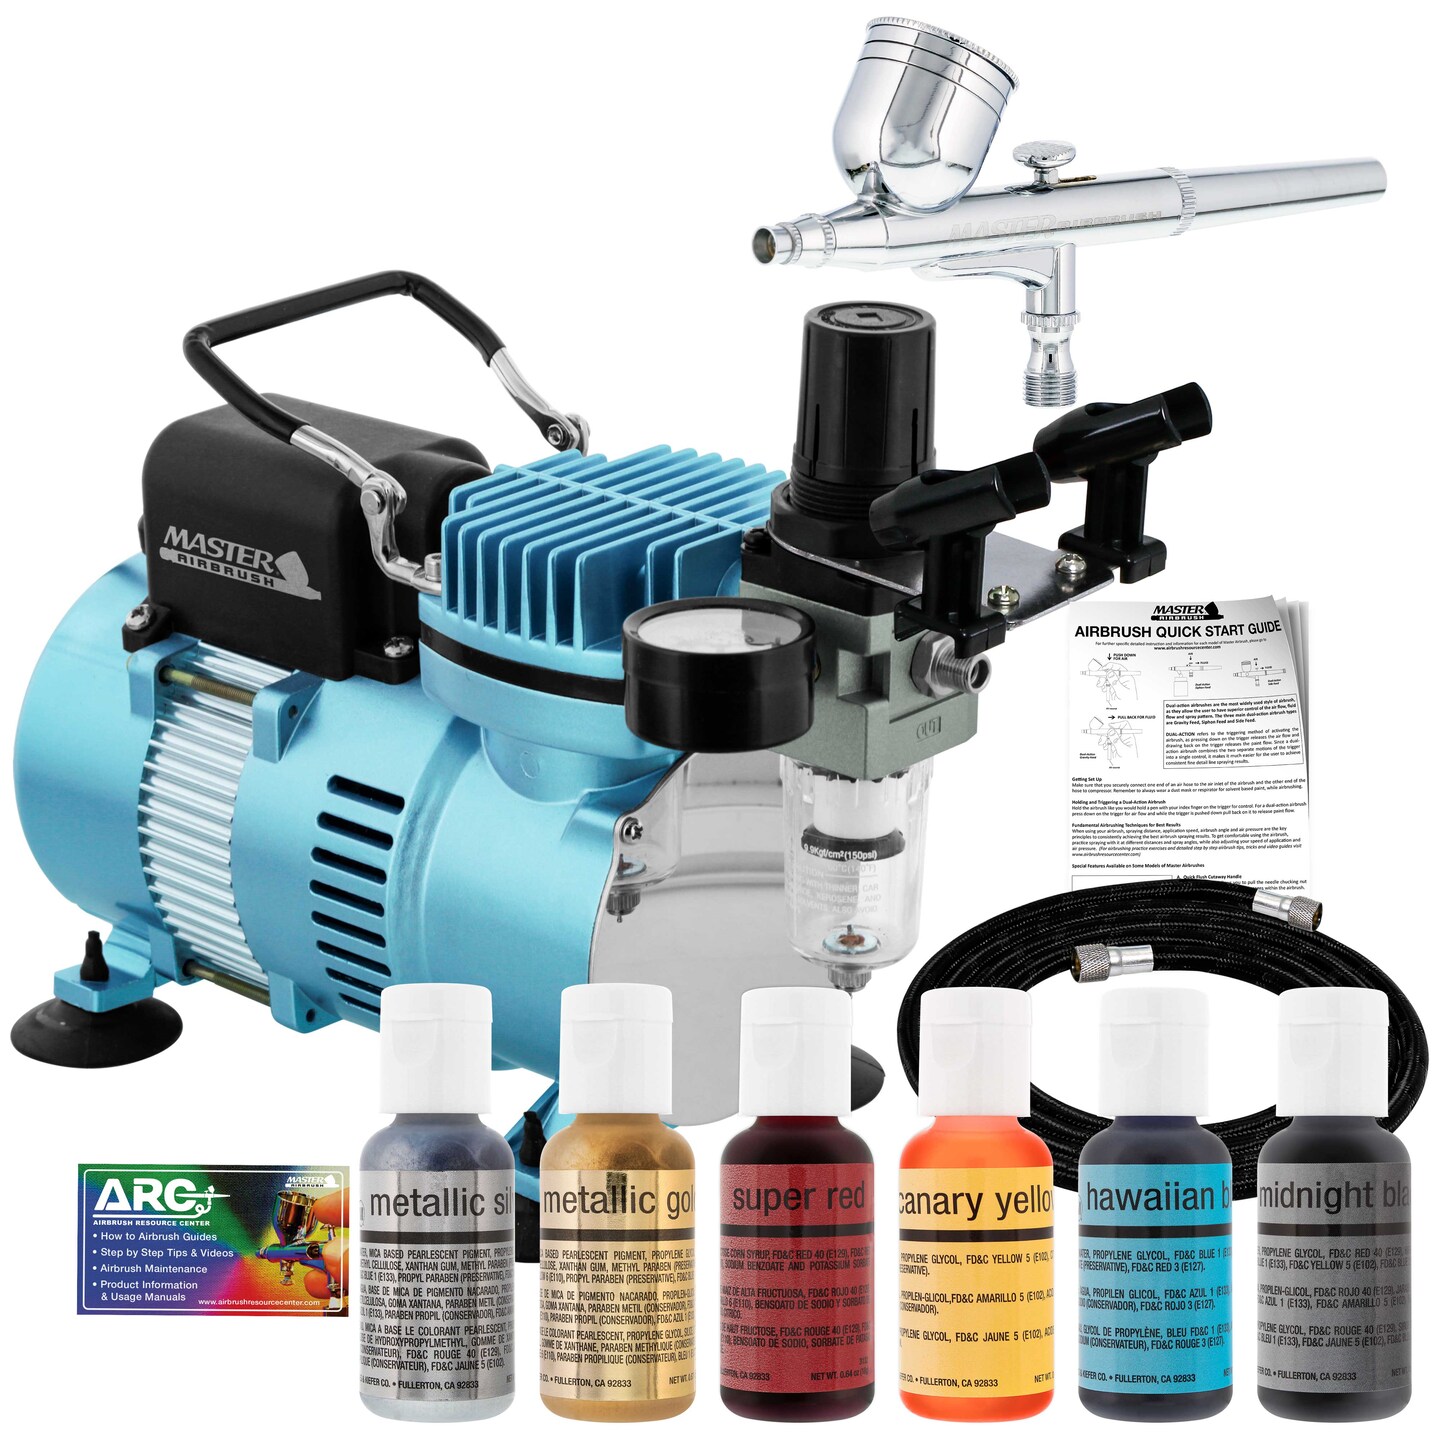 Professional Master Airbrush Cake Decorating Airbrushing System Kit, 6 Color Chefmaster Food Coloring Set, G22 Gravity Feed Airbrush &#x26; Air Compressor